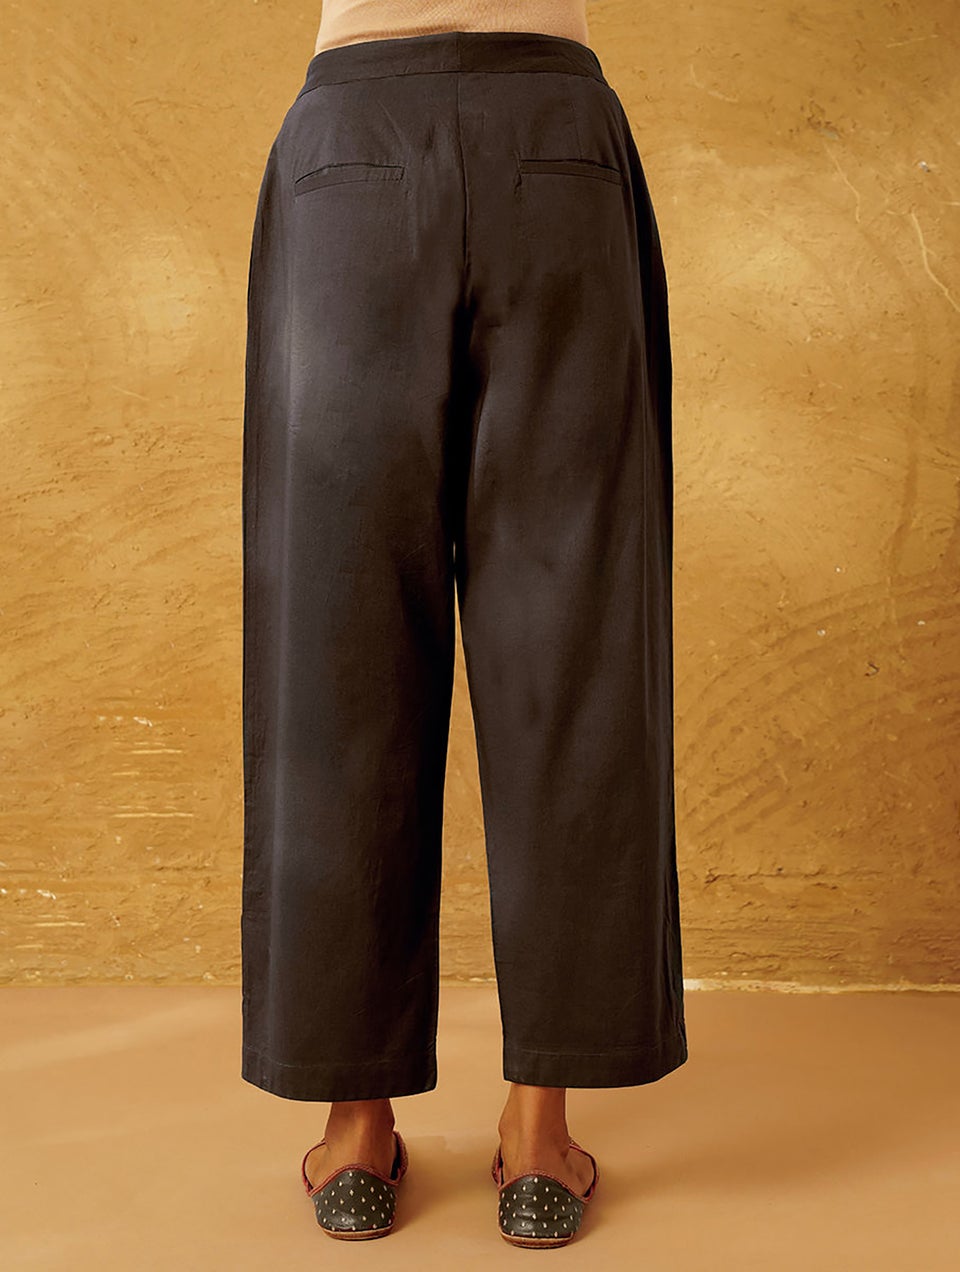 Black Natural Dyed Cotton Pants With Button Closure - XS